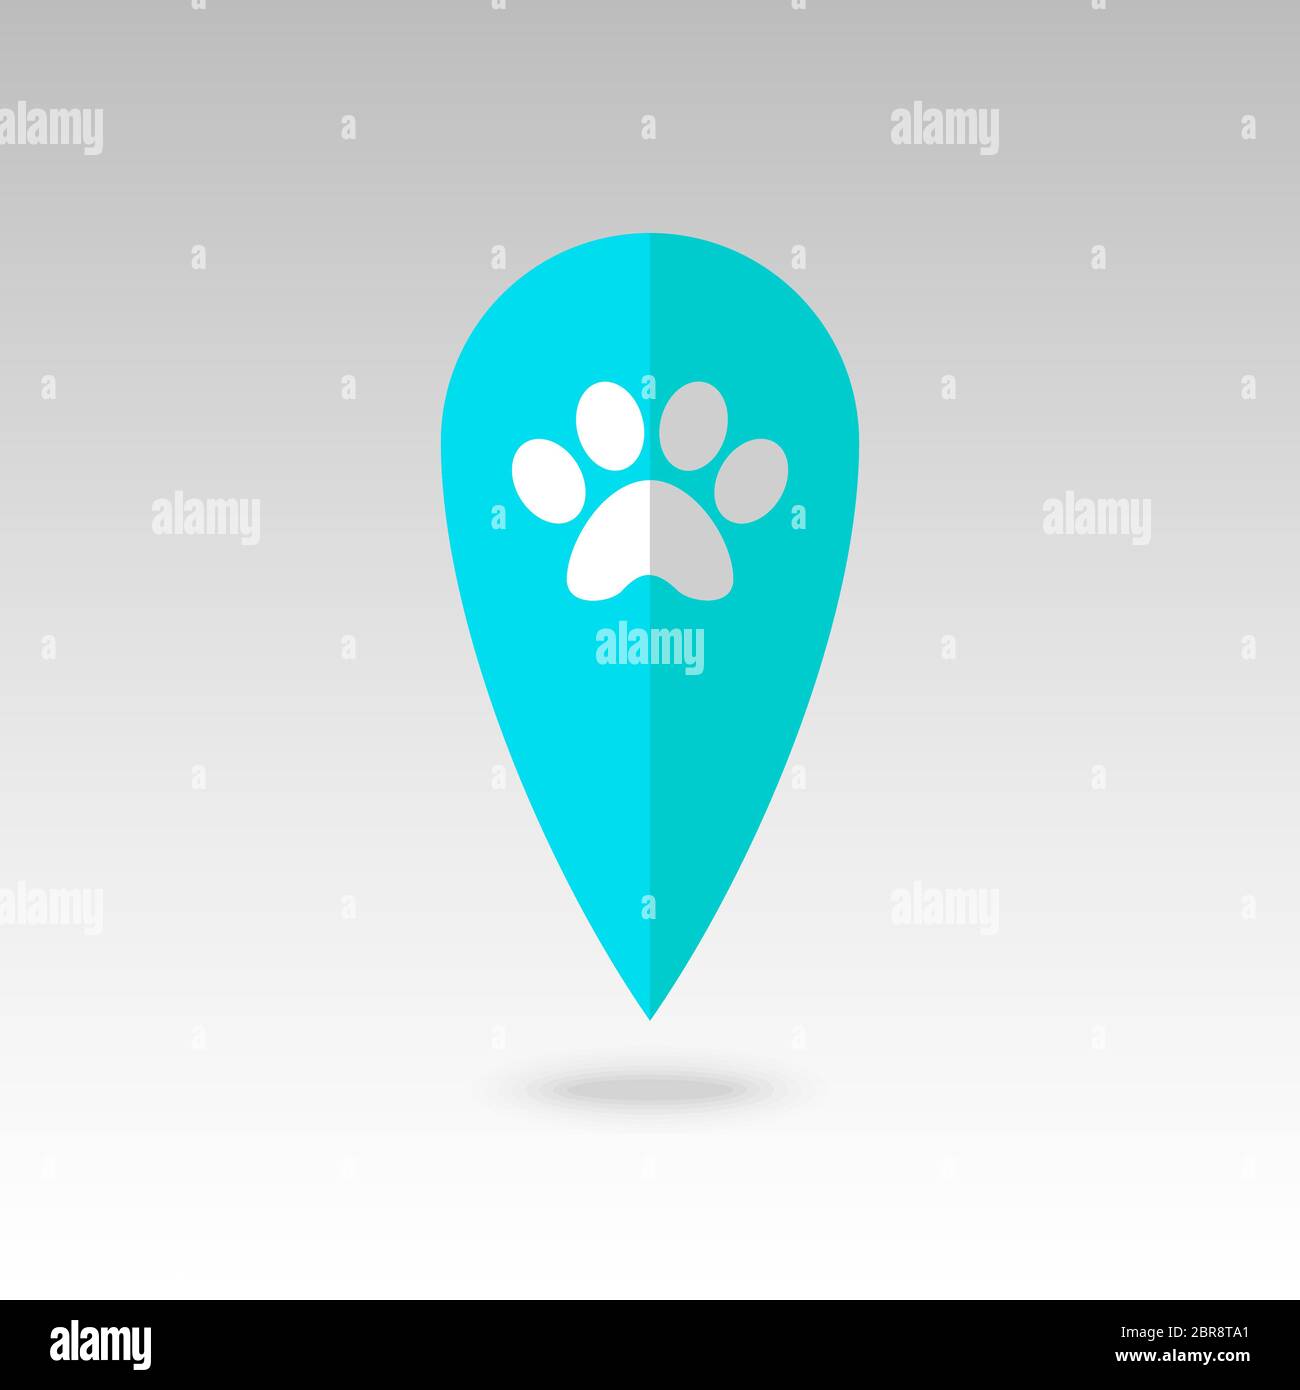 Dog paw pin map icon. Map pointer. Map markers. Destination vector icon. GPS location symbol. Mapping pins icon EPS 10 vector file has transparency, s Stock Photo